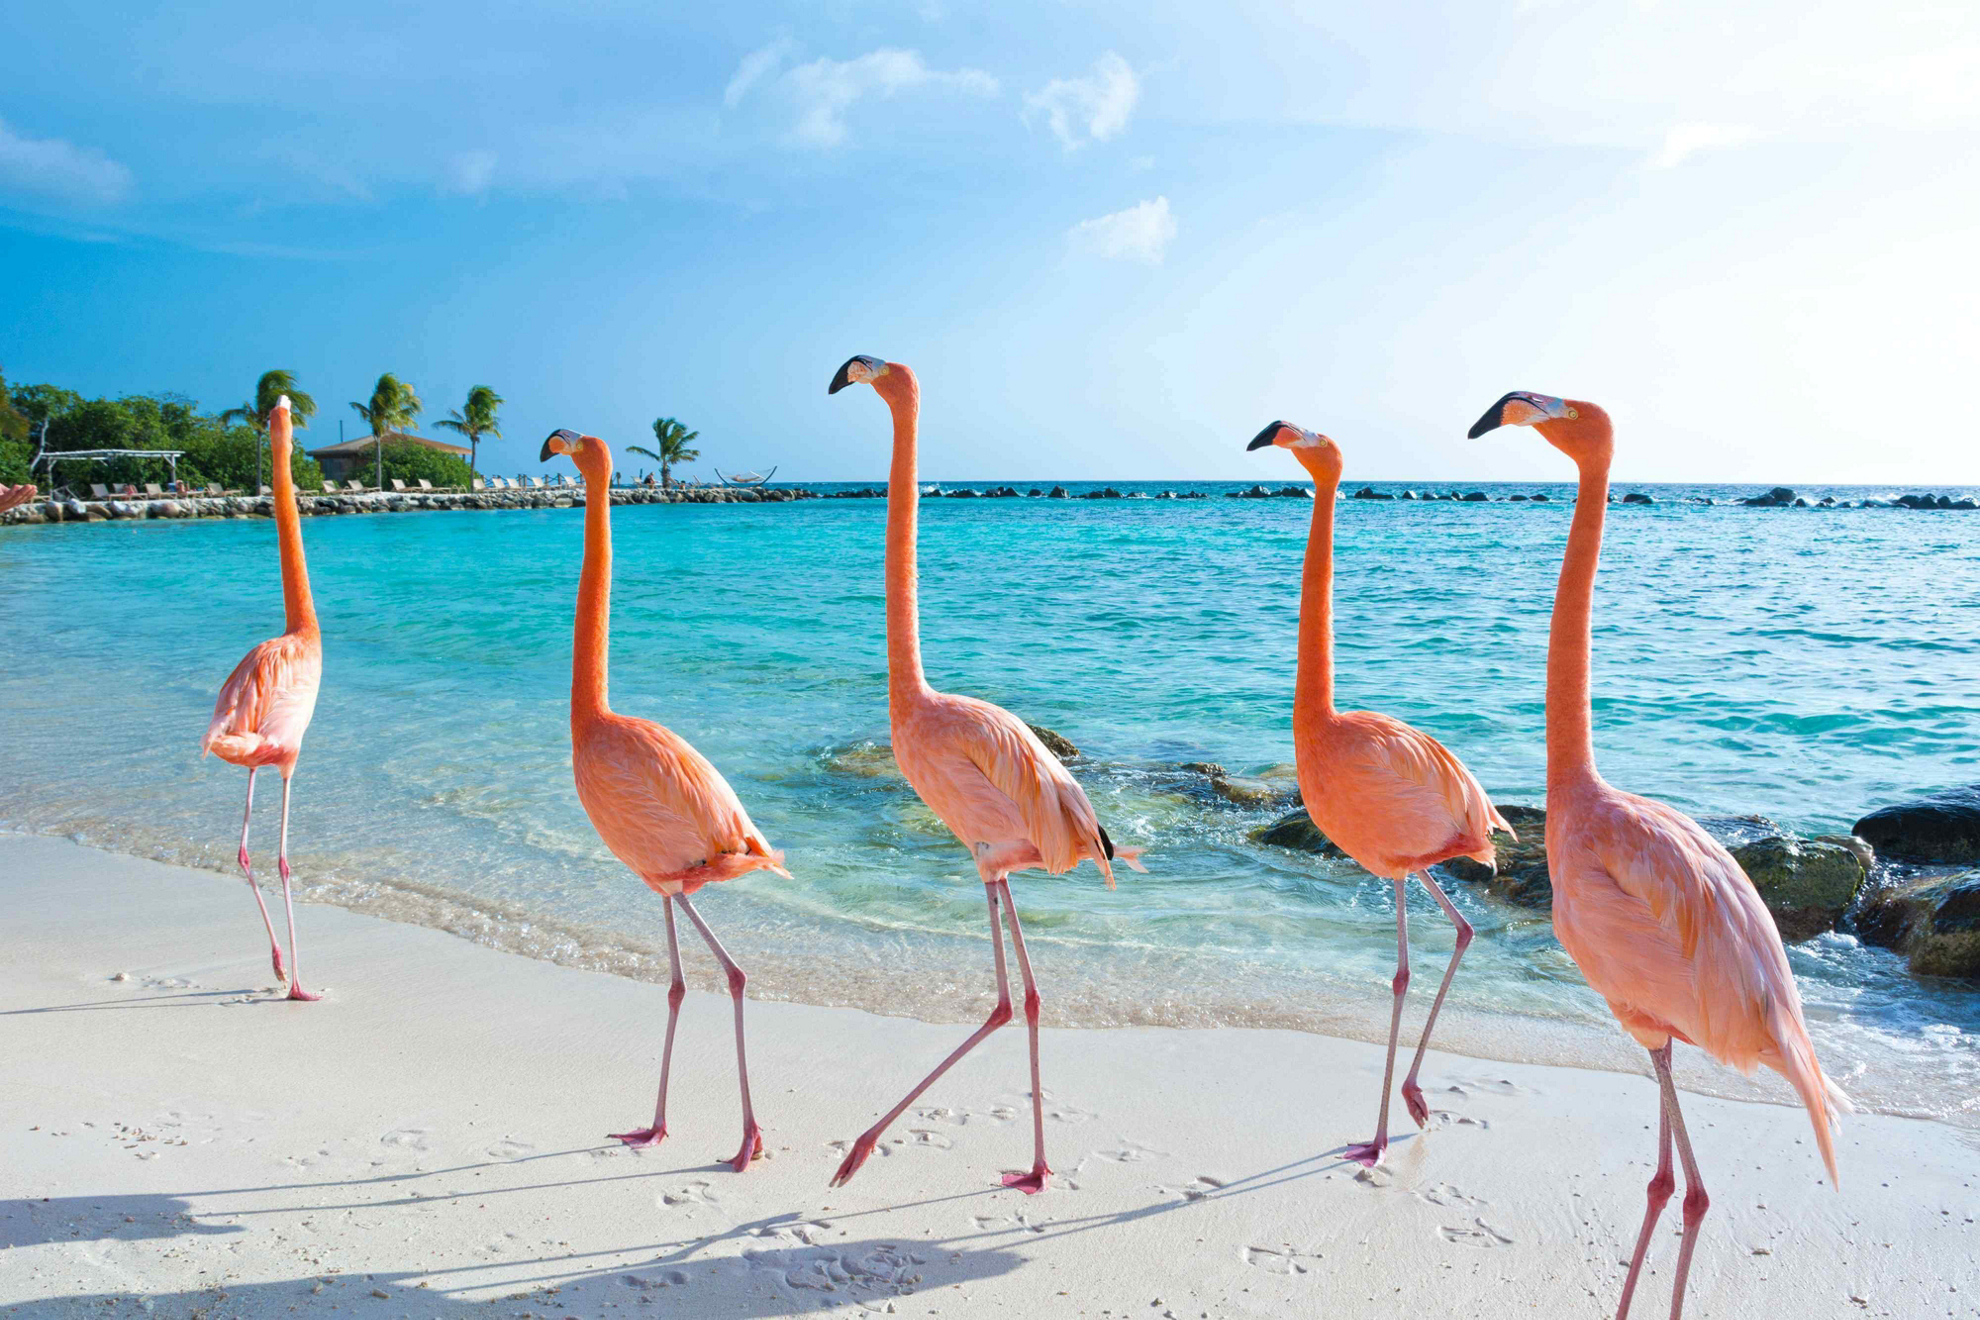 Flamingos on the beach are one of the many fun facts about Aruba